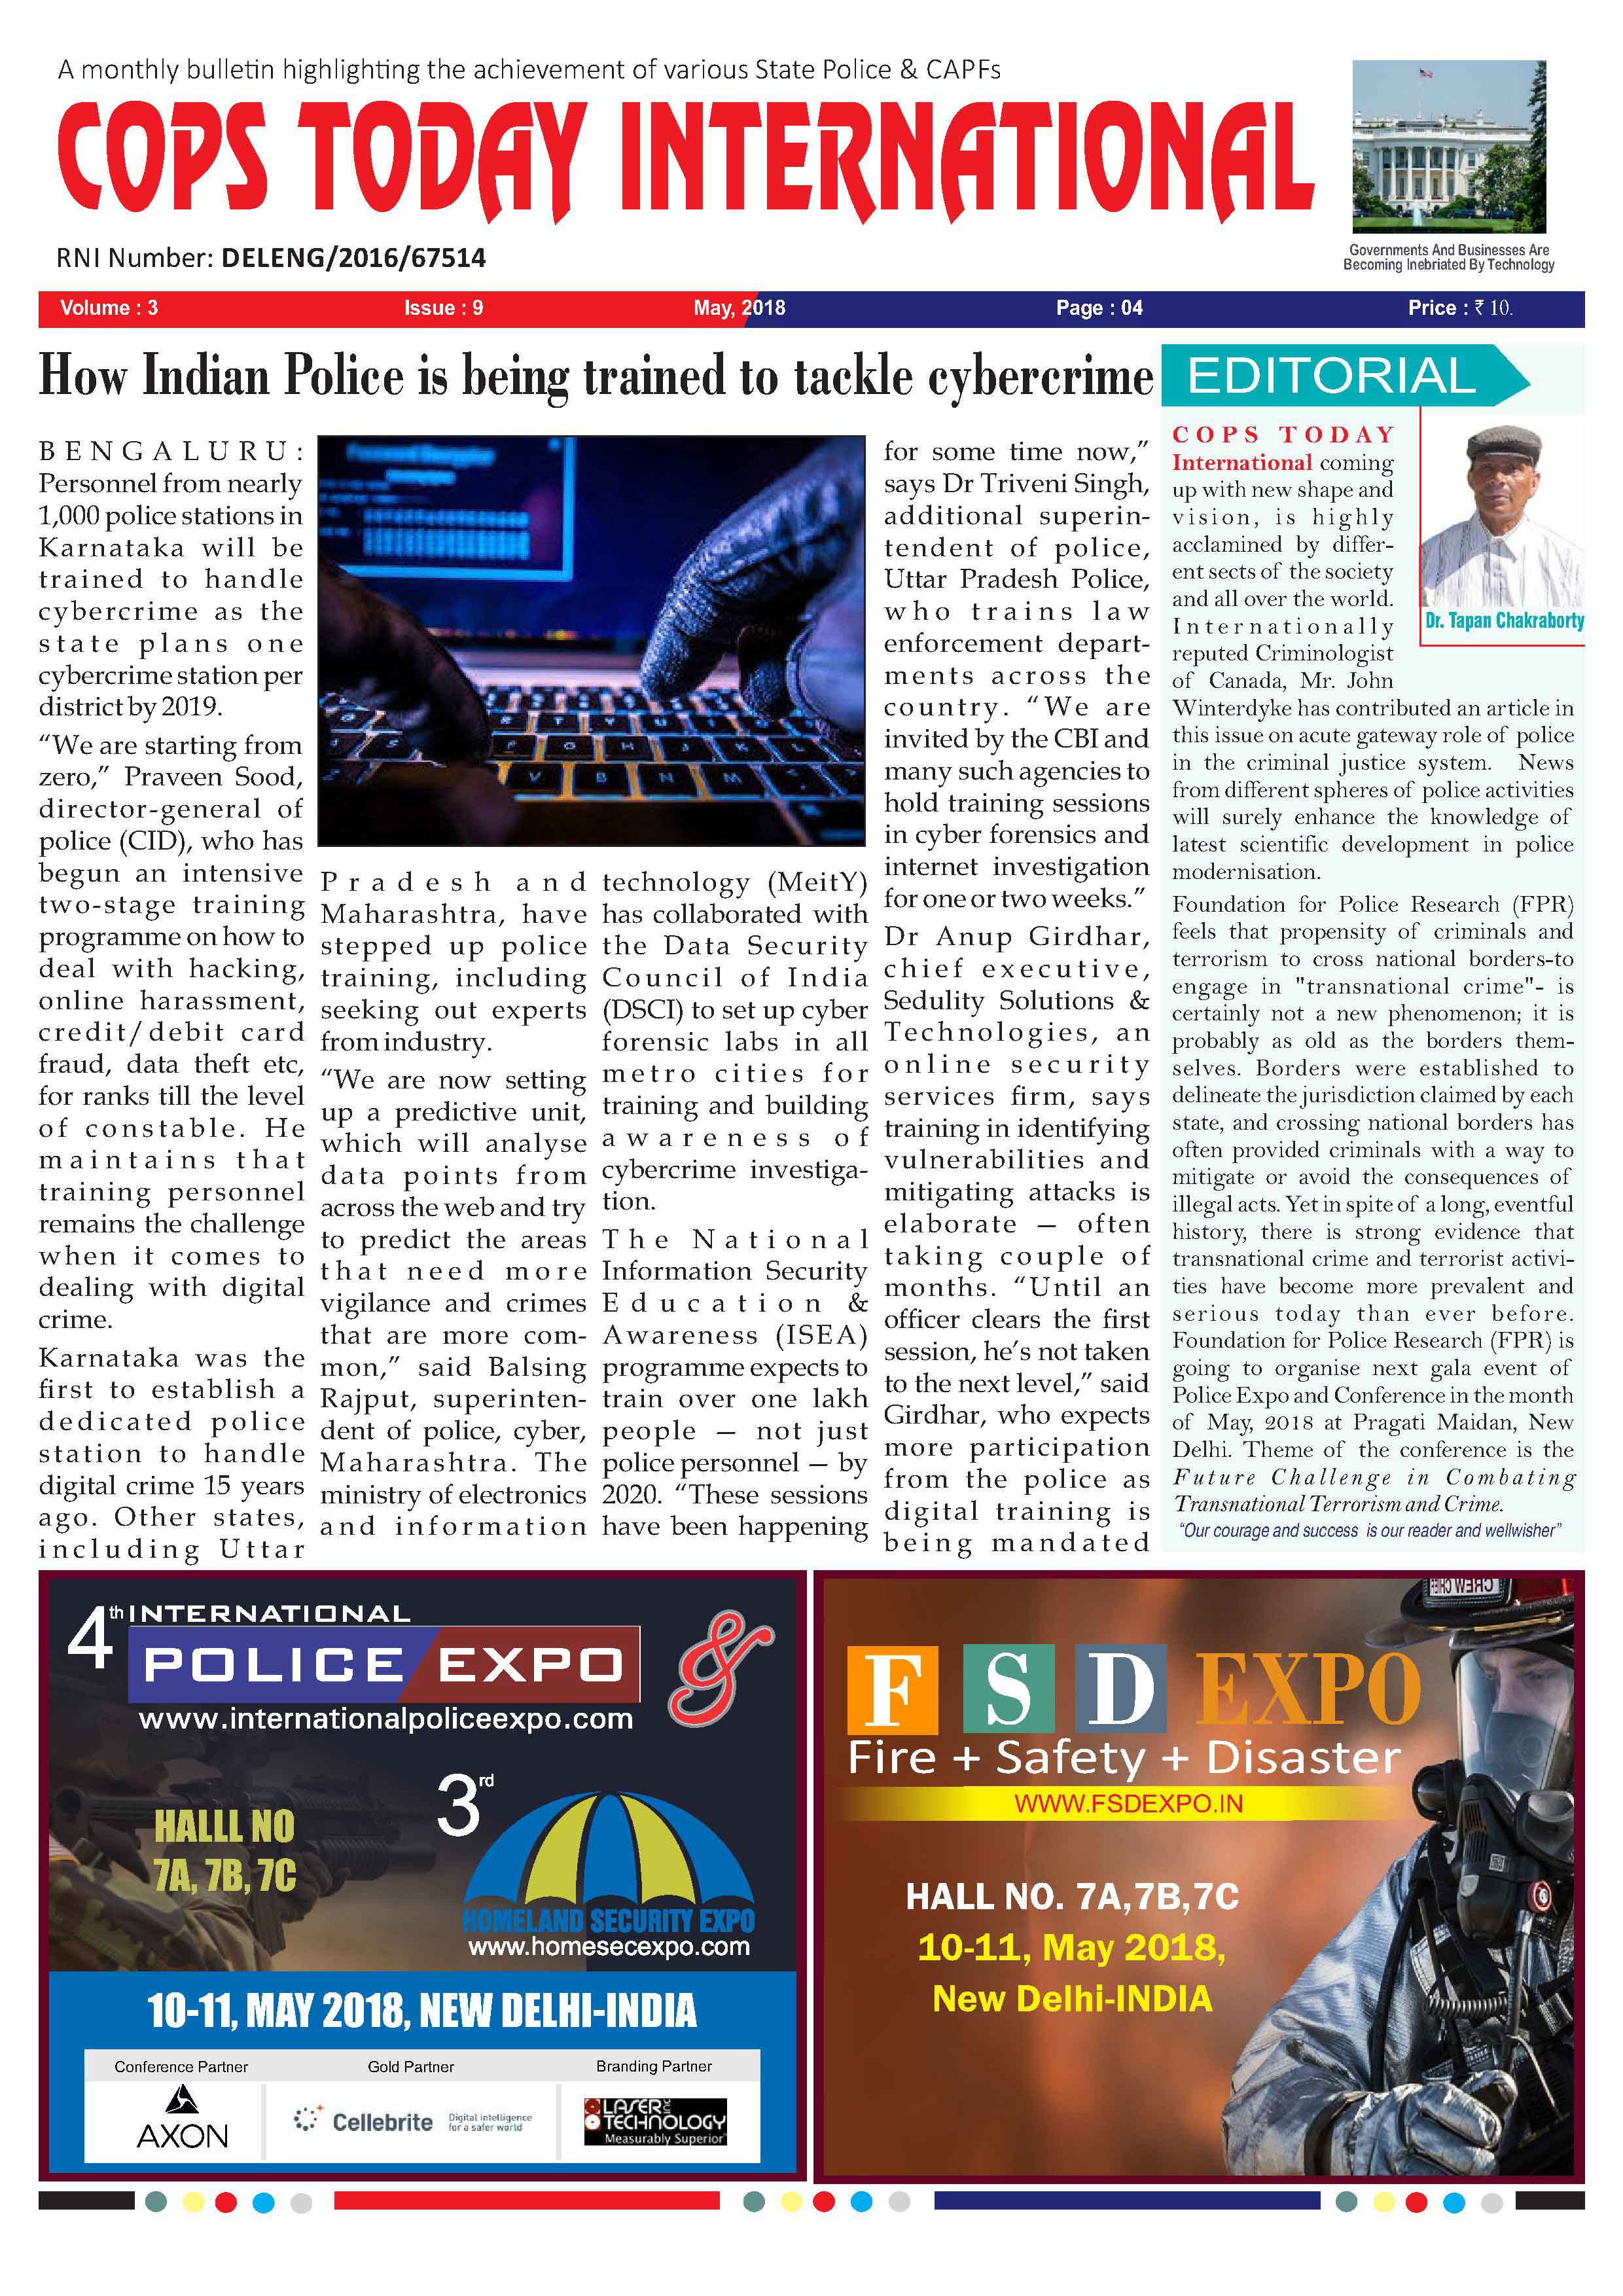 Cops Today News Paper of May 2018